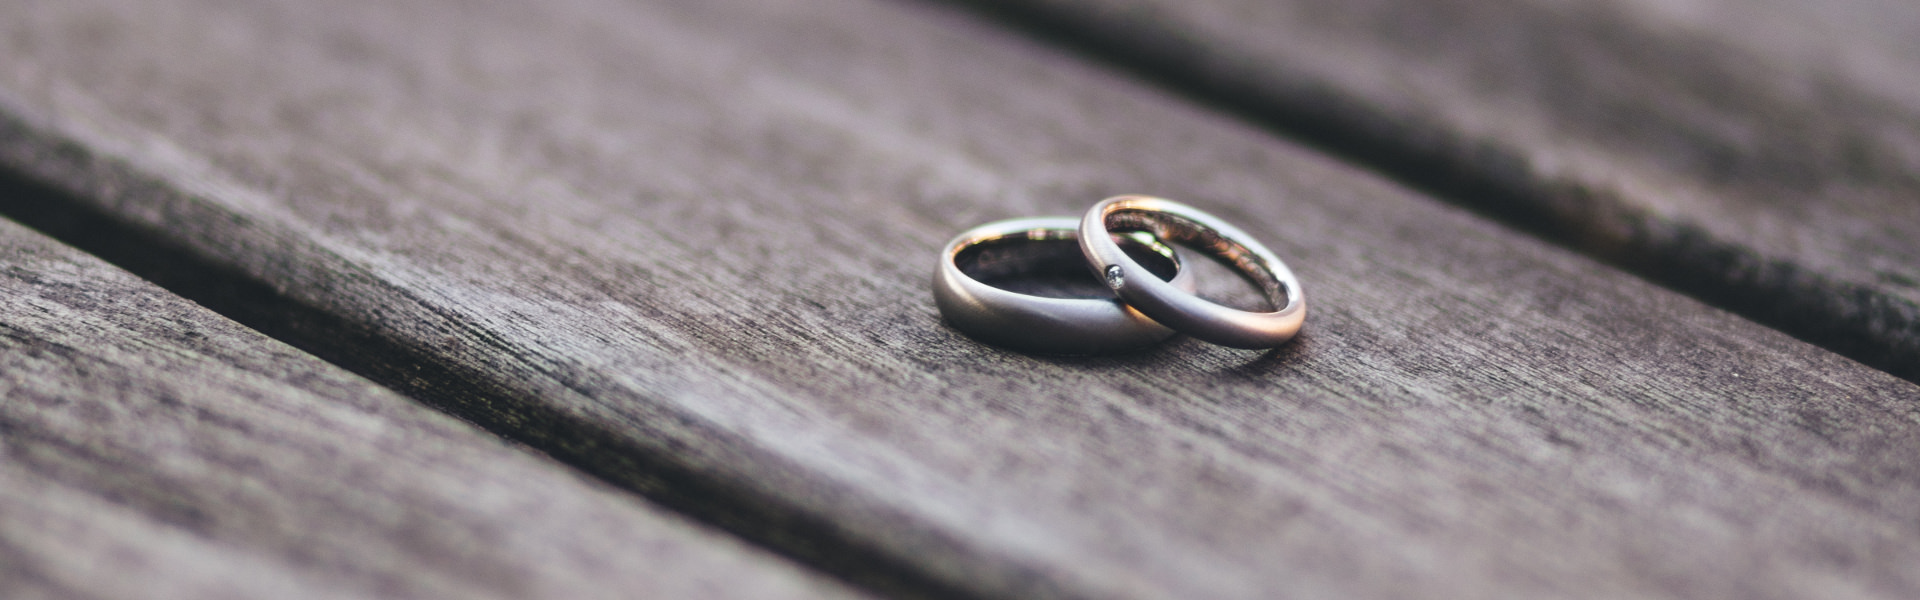 Pair of wedding rings on a plank board